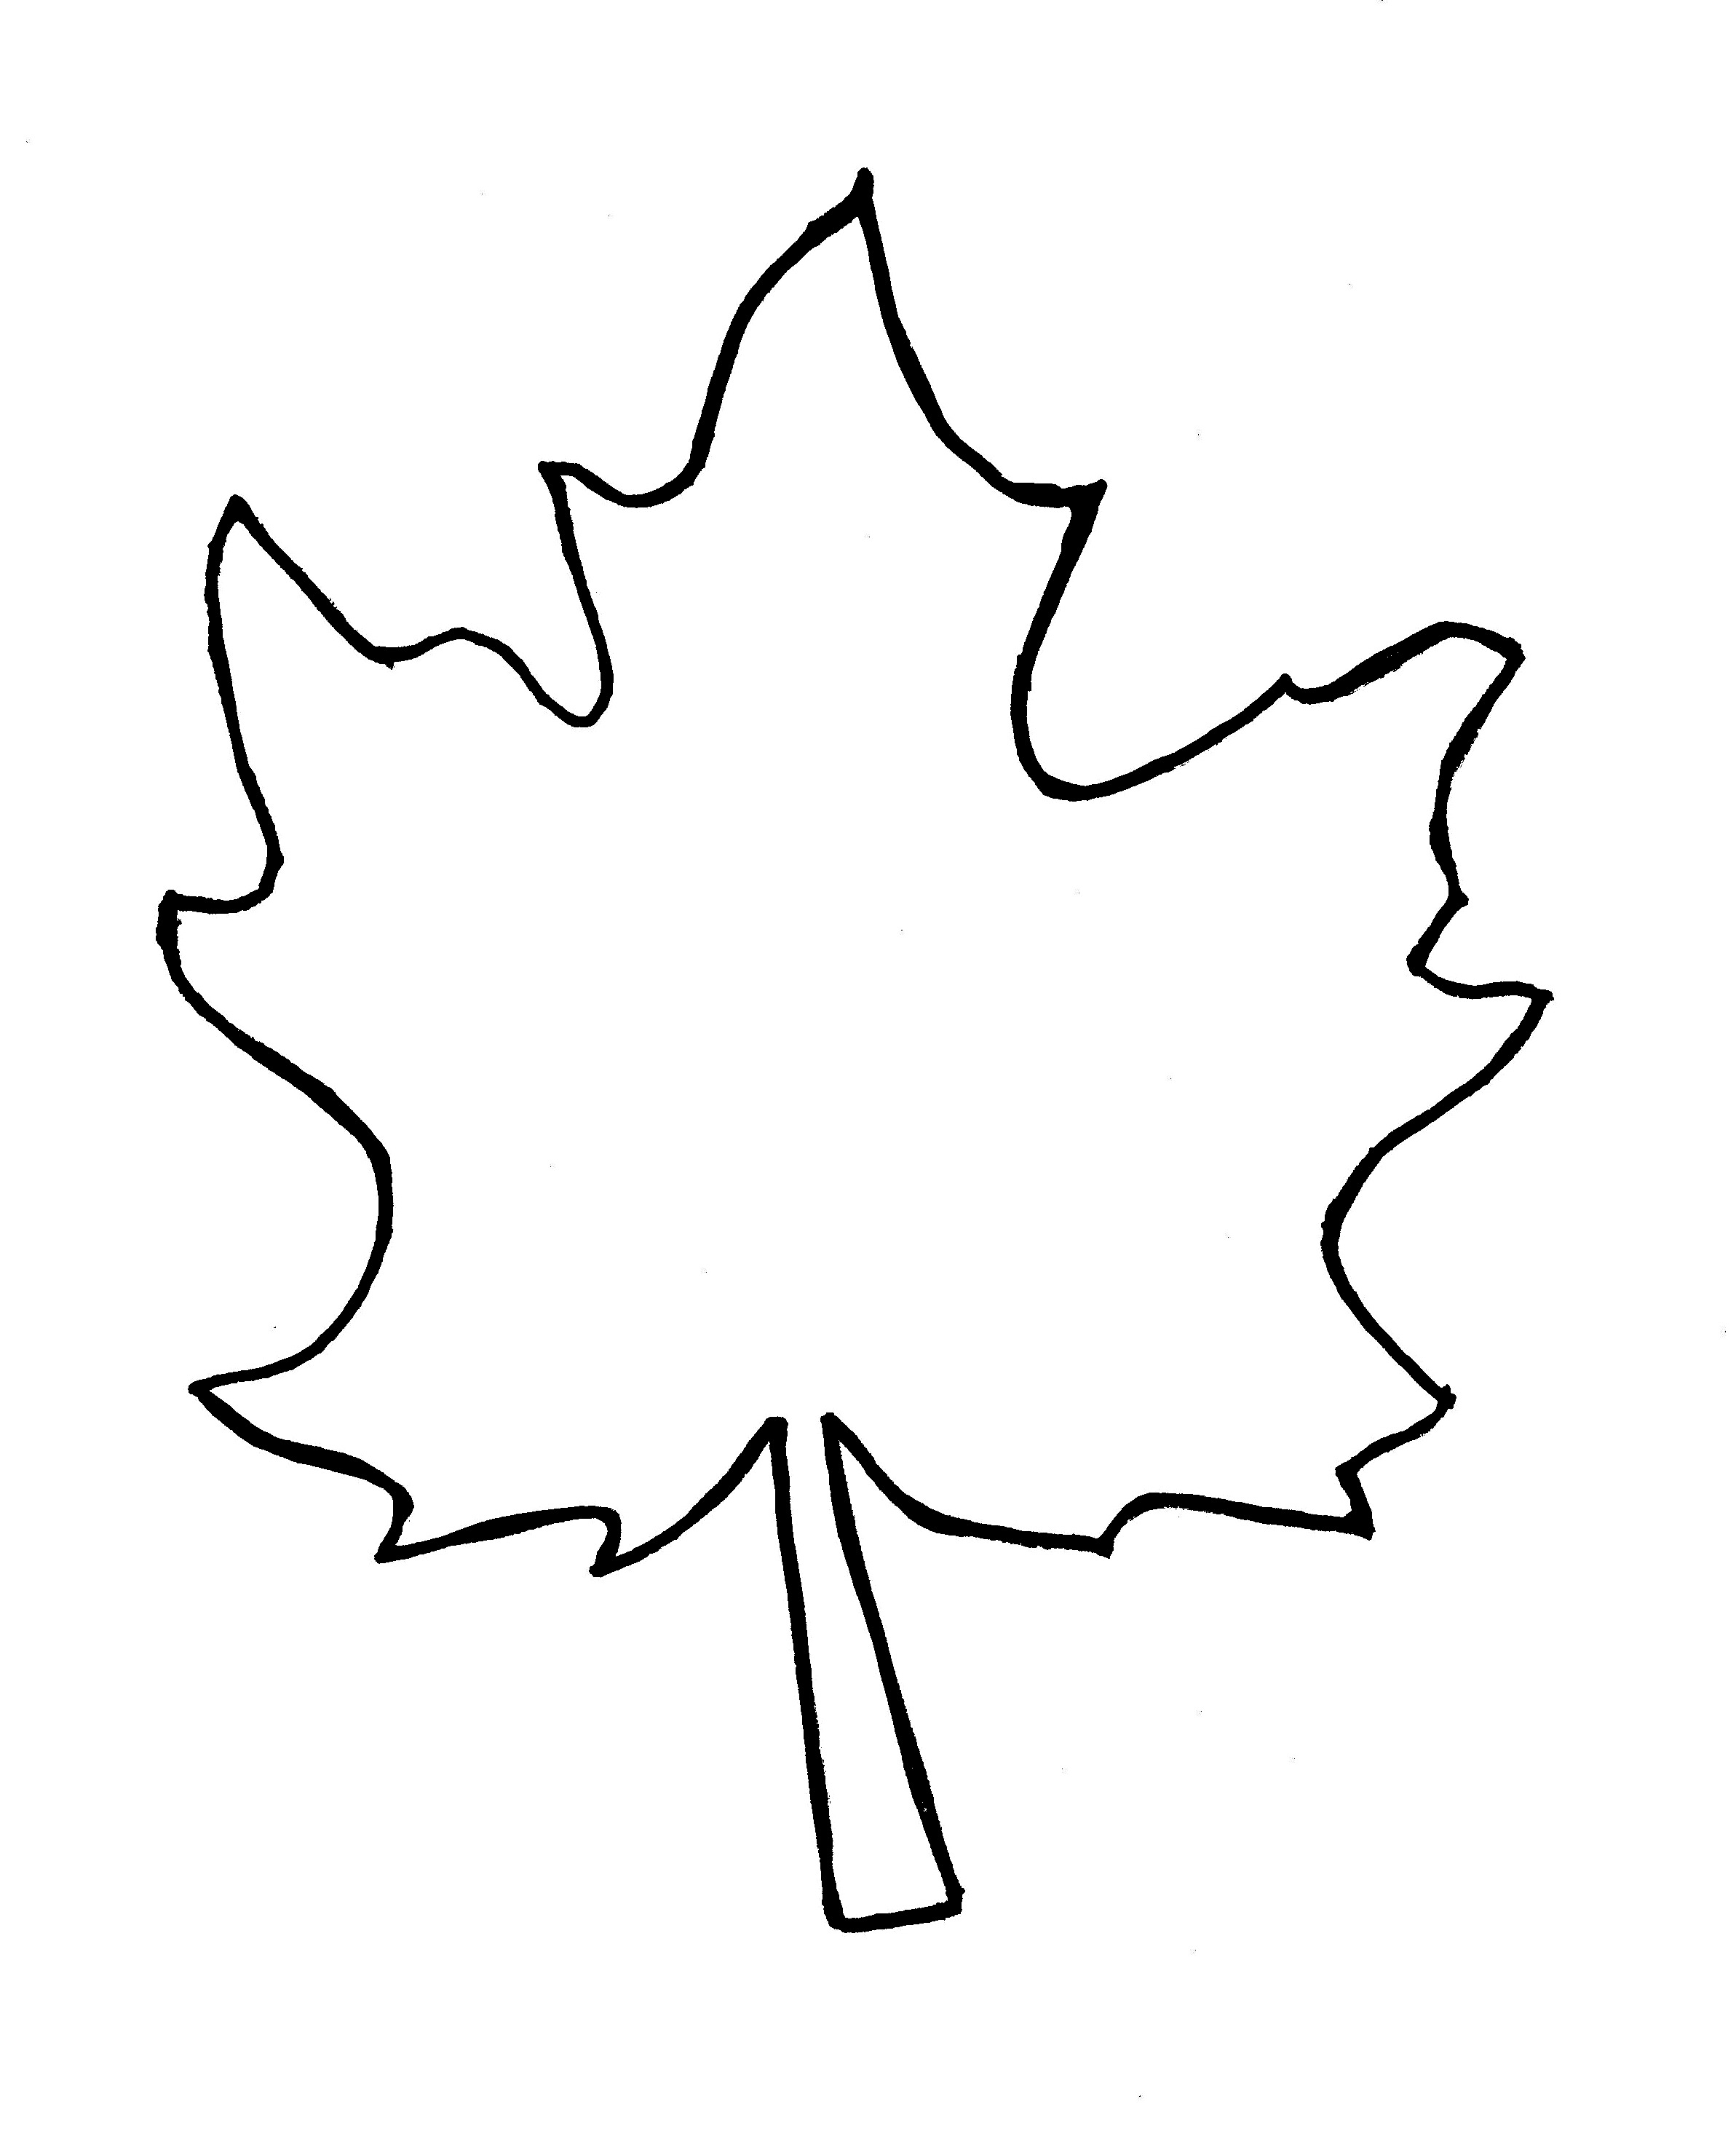 Fall Leaf Clipart Outline | Clipart Panda - Free Clipart Images